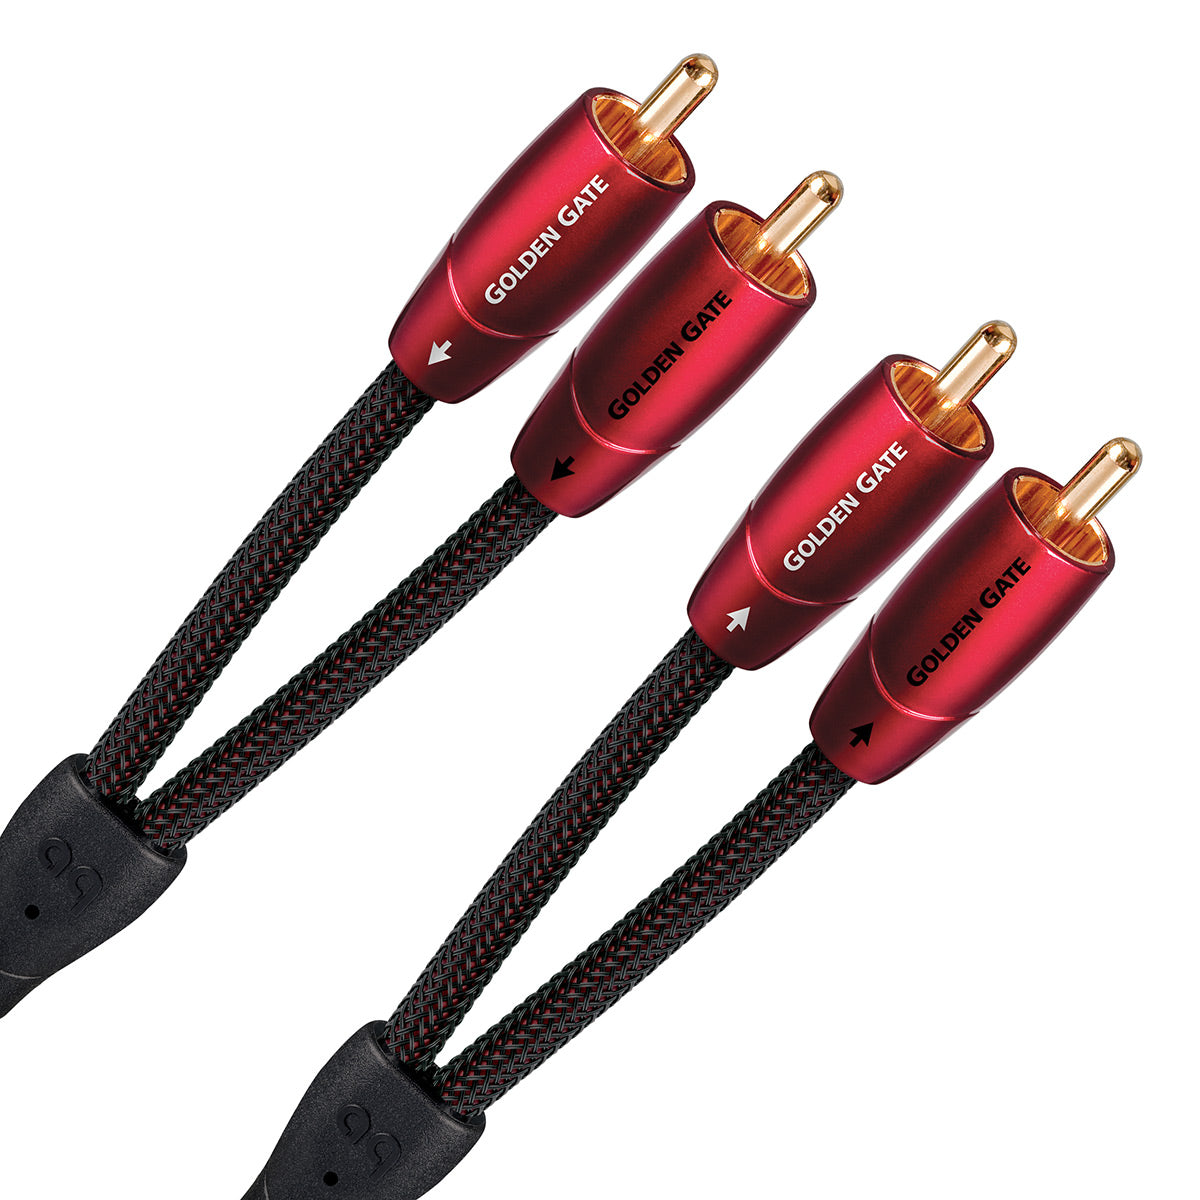 AudioQuest Golden Gate RCA to RCA Analog Interconnect Cable - 0.6 meters